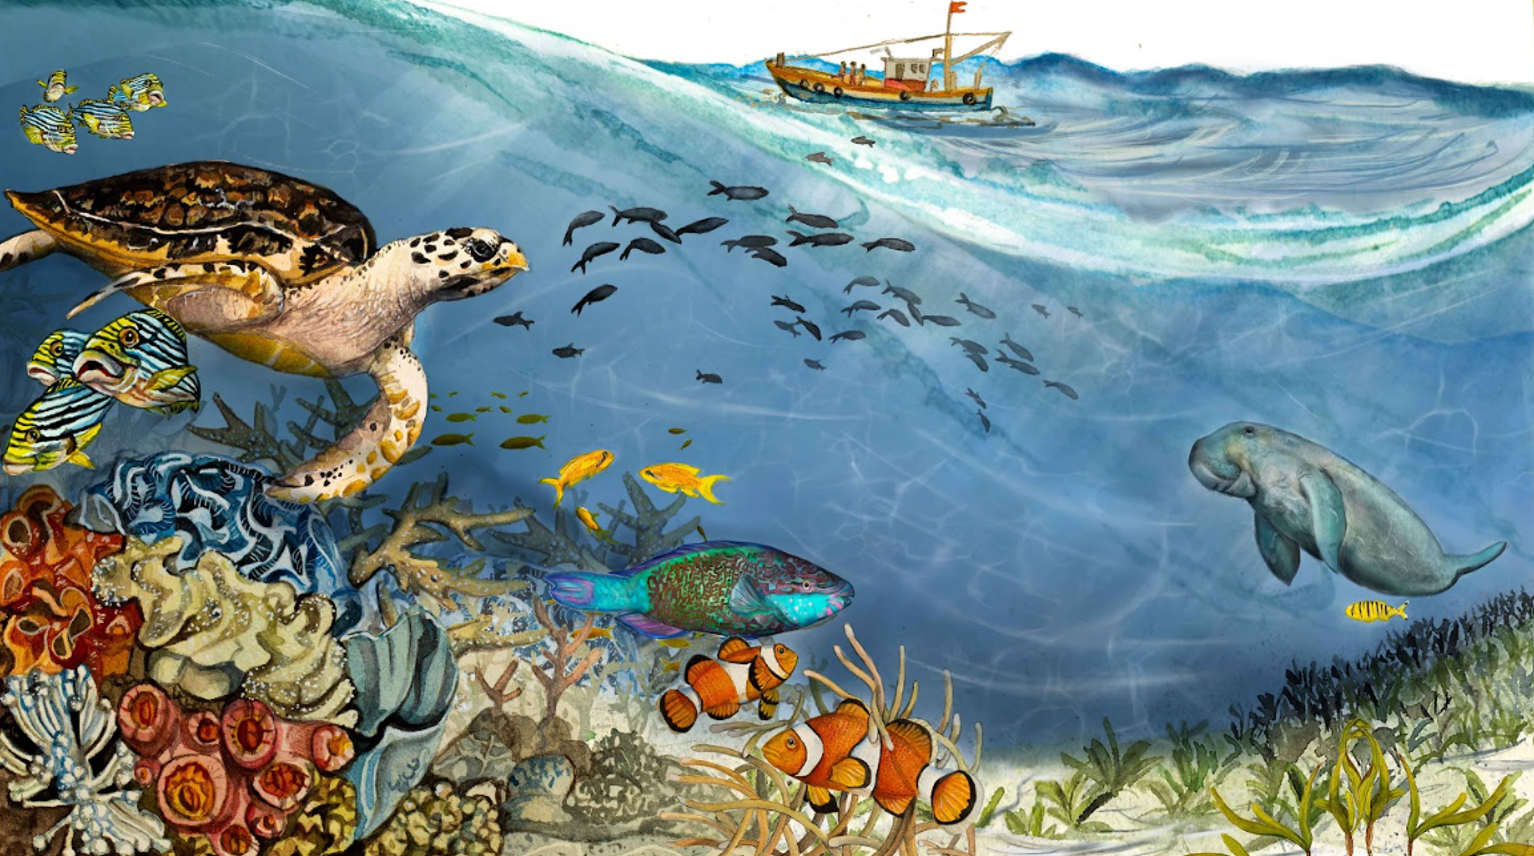 This banner features an Indian coastal marine ecosystem. Elements: leatherback turtle, parrtofish, dugong, seagrass, corals, schools of fish in the background, ocean waves, clownfish, and a fishing boat in the distance.